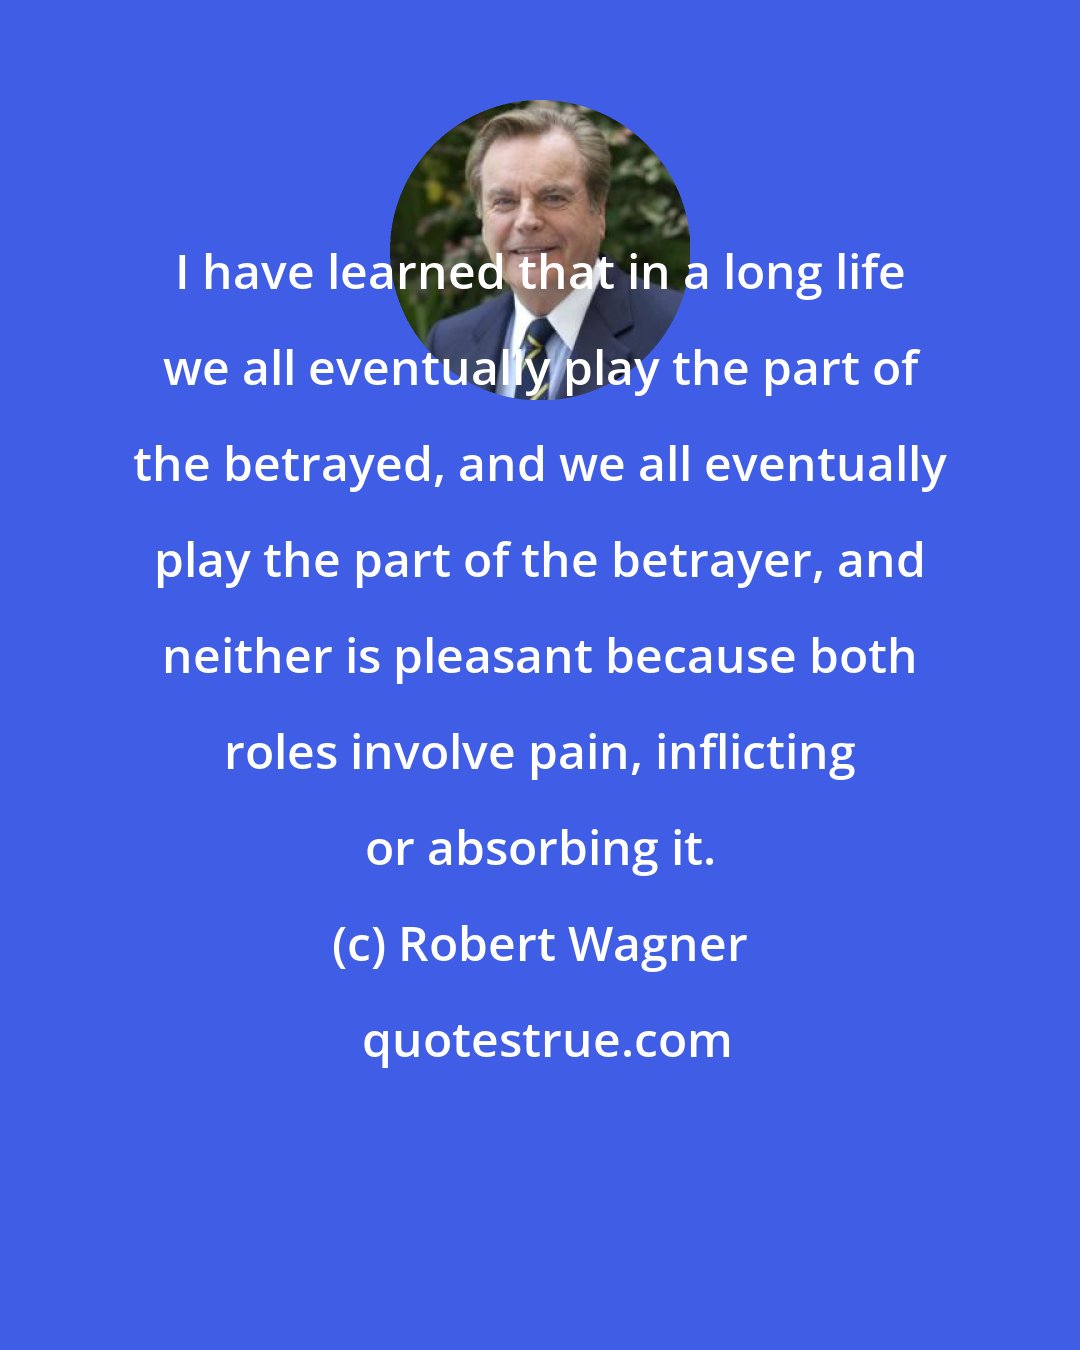 Robert Wagner: I have learned that in a long life we all eventually play the part of the betrayed, and we all eventually play the part of the betrayer, and neither is pleasant because both roles involve pain, inflicting or absorbing it.